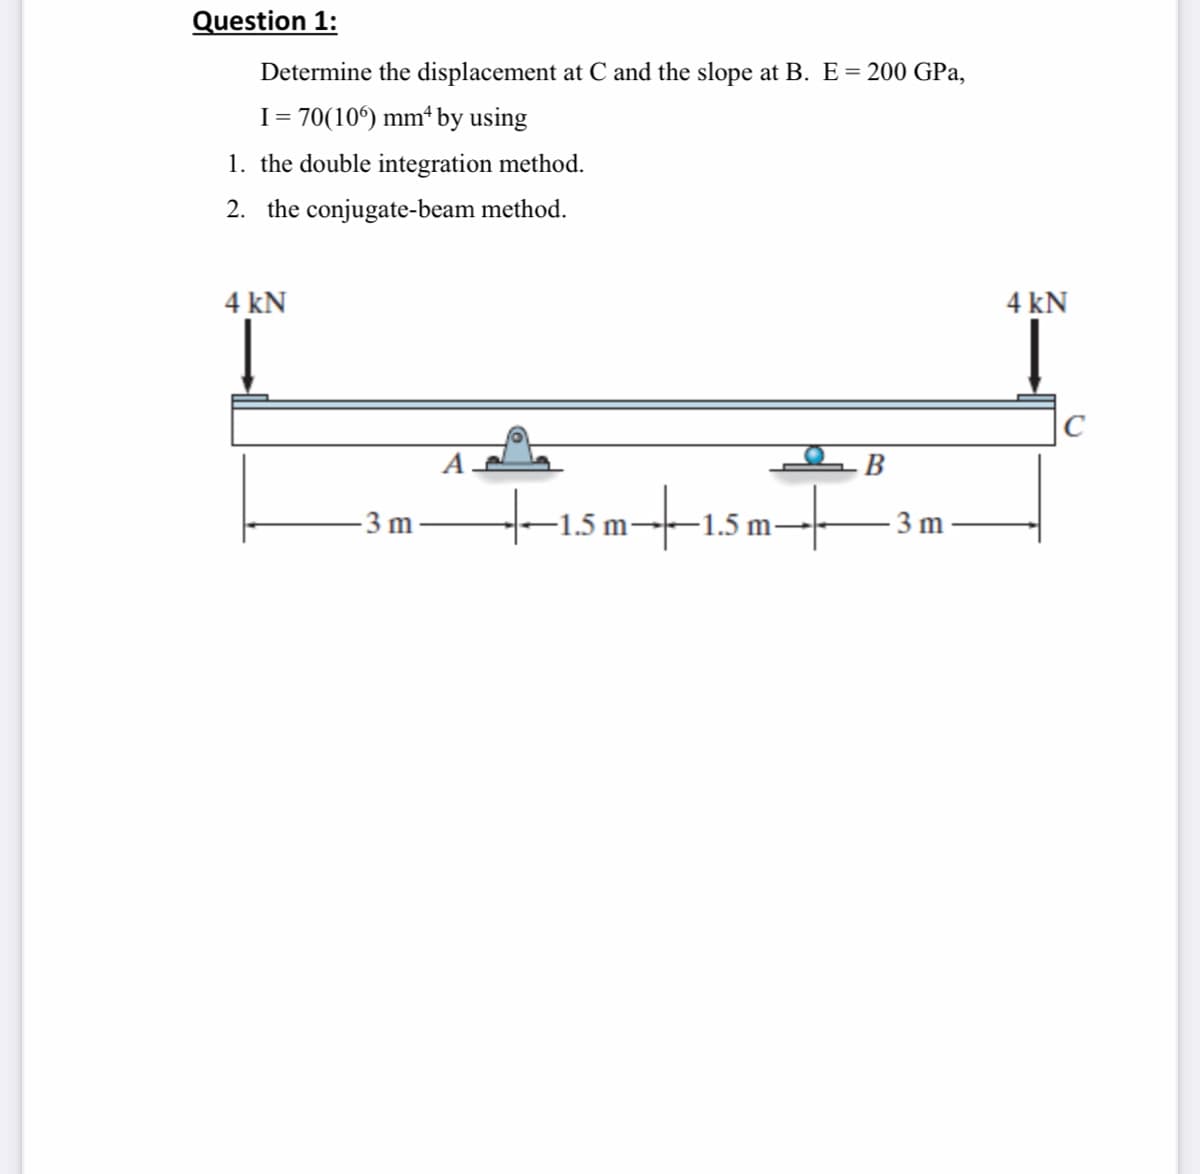 Question 1:
Determine the displacement at C and the slope at B. E= 200 GPa,
I= 70(10°) mm* by using
1. the double integration method.
2. the conjugate-beam method.
4 kN
4 kN
-B
tismtısmt
3 m
-1.5 m-
-1.5 m.
3 m
